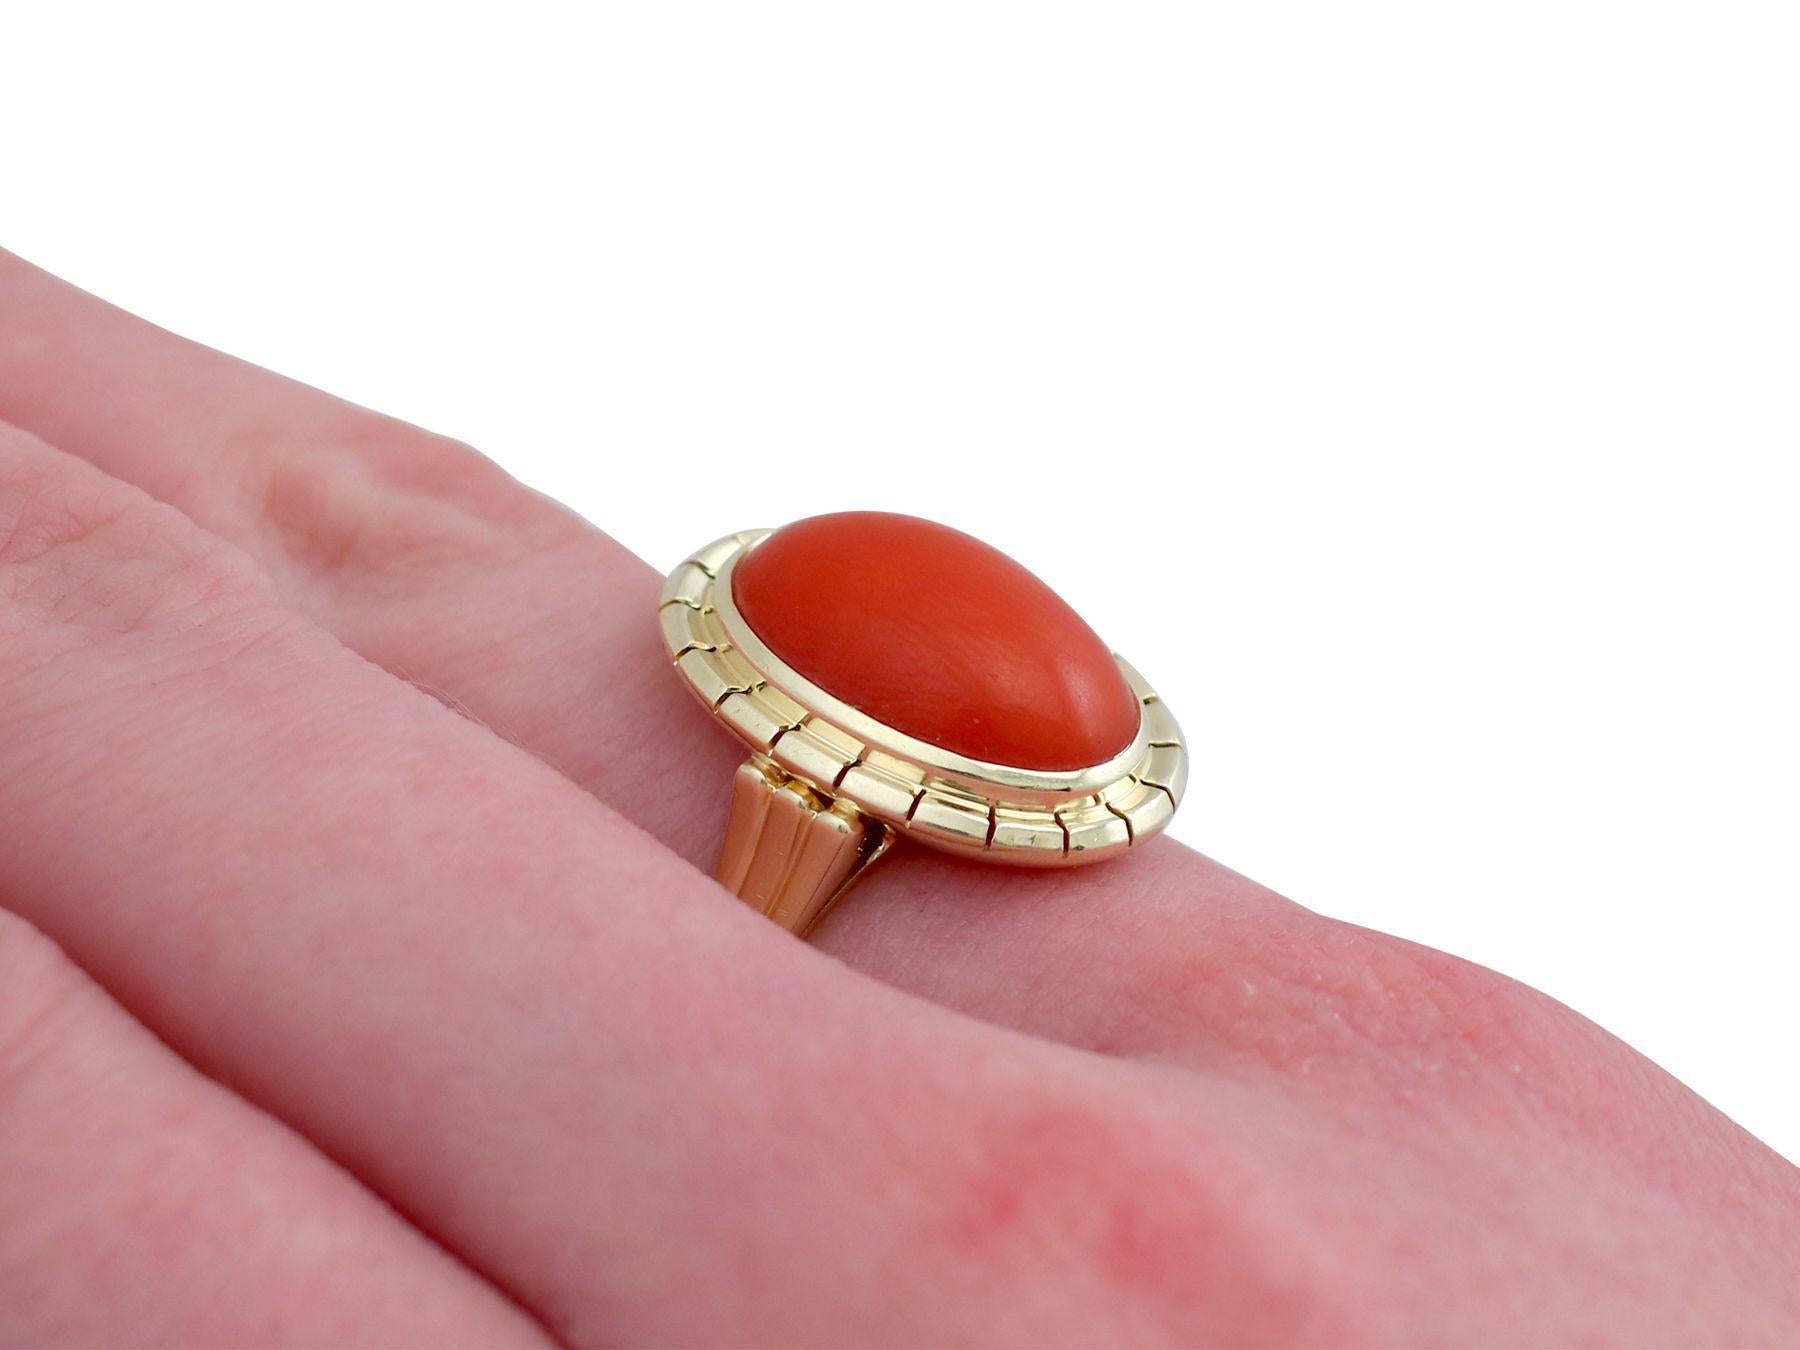 Vintage 1940s 4.84 Carat Cabochon Cut Coral and Yellow Gold Cocktail Ring For Sale 2